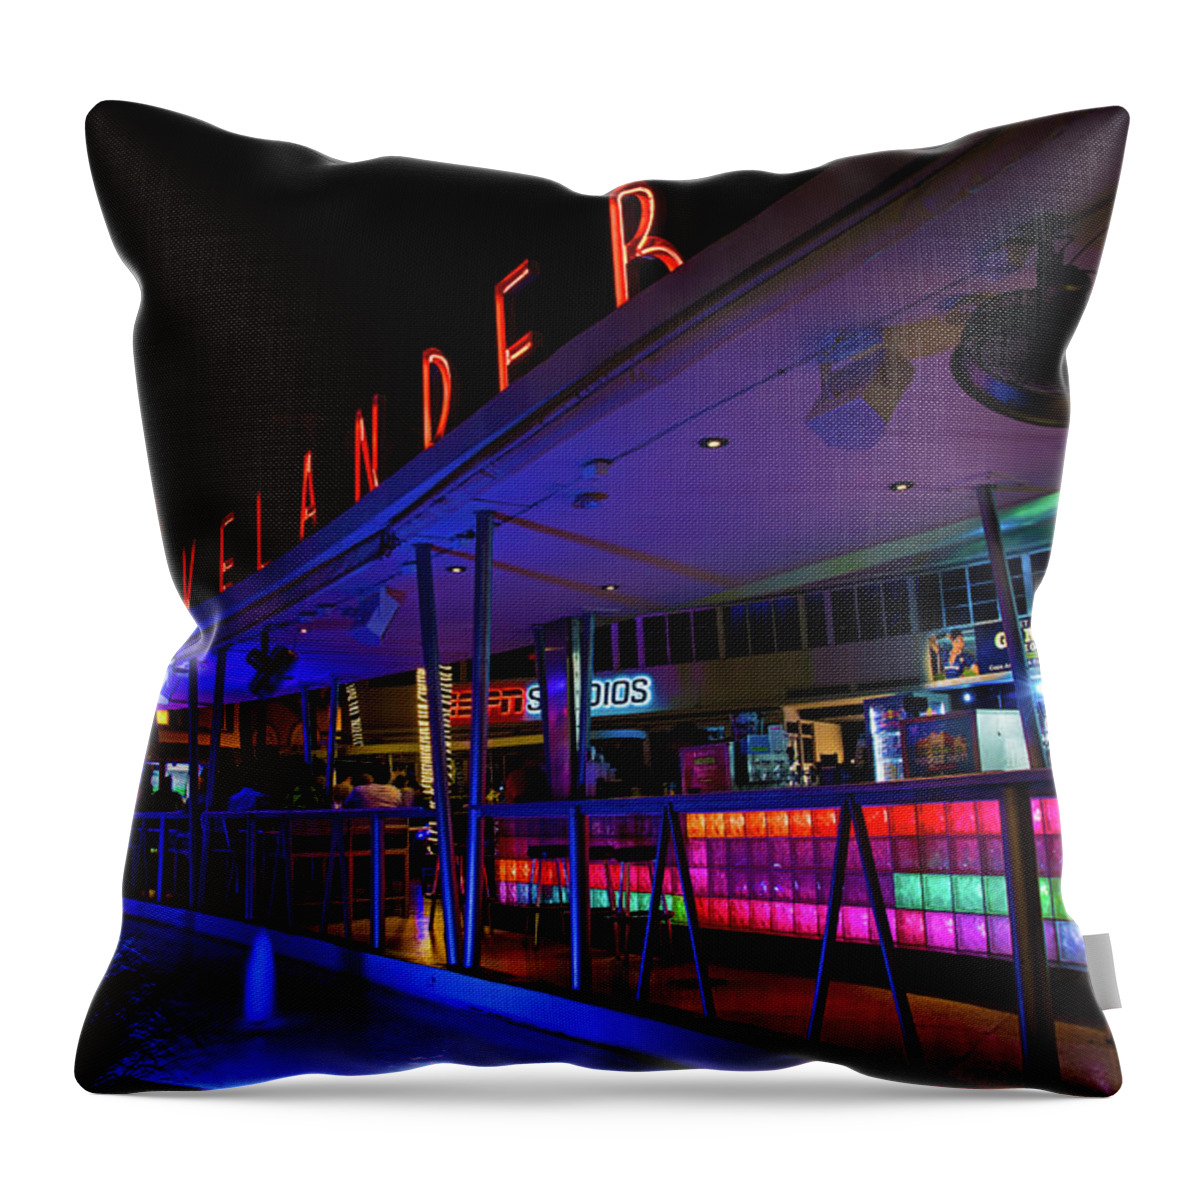 Miami Beach Throw Pillow featuring the photograph Clevelander Bar by Rick Bravo